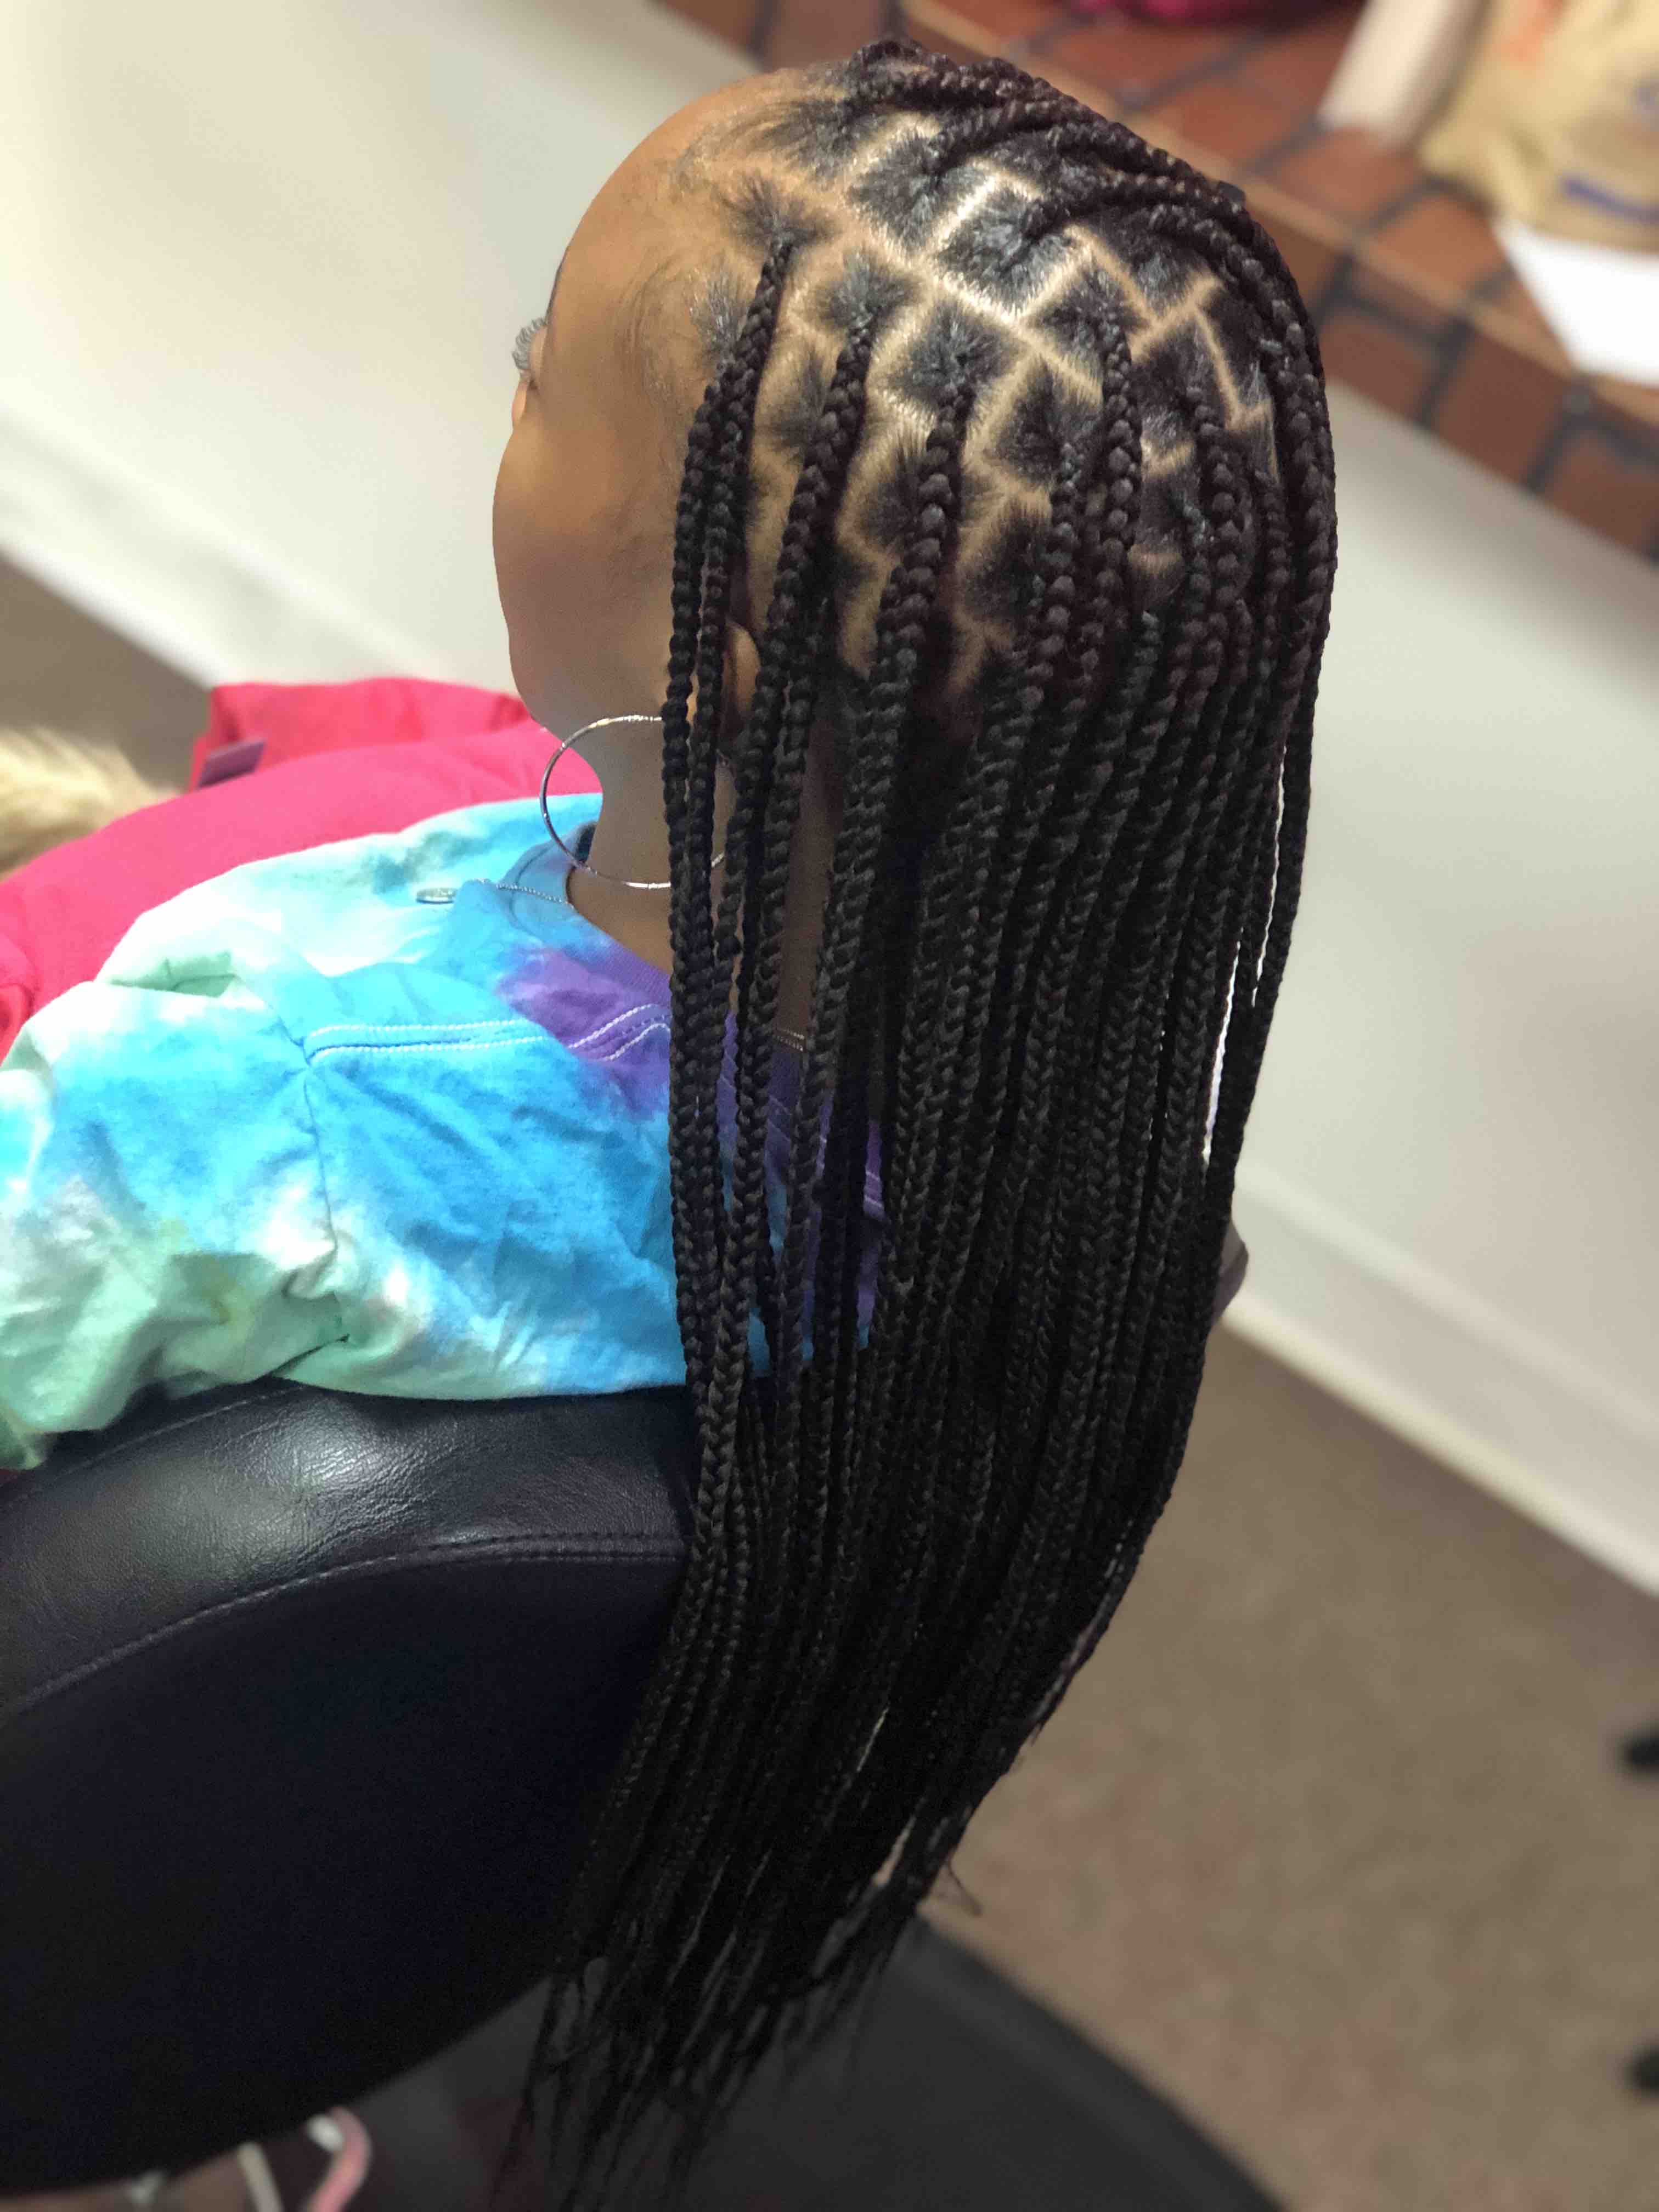 Smedium bra length knotless for m'y first time braids wearing beautiful  client🥰 She was so shocked by how light weight they felt.